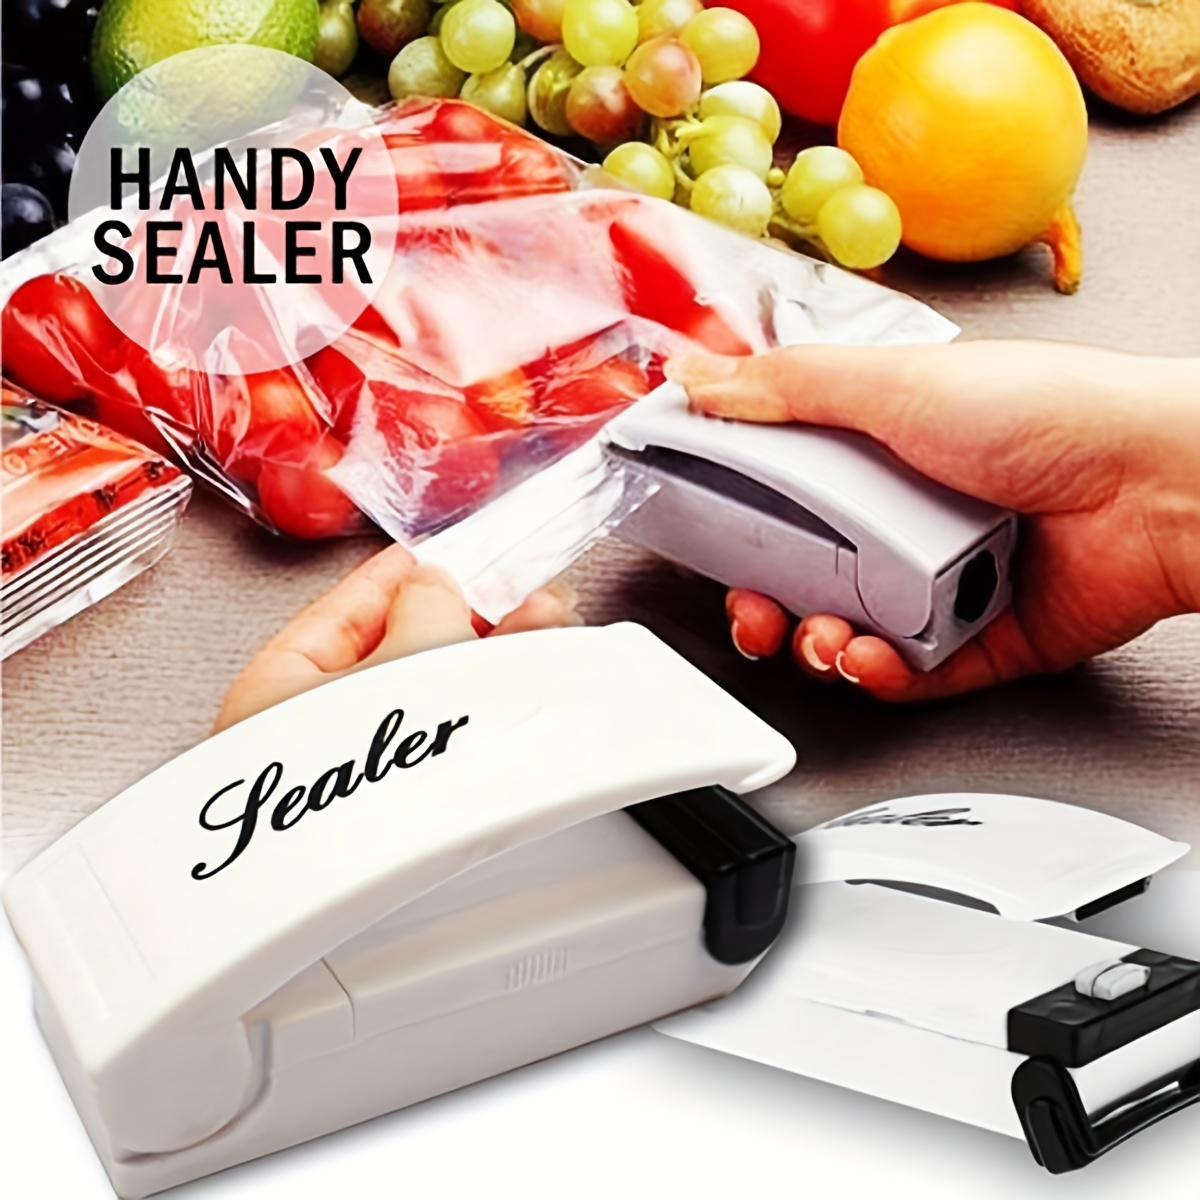 Mini Bag Sealer, Portable Chip Bag Sealer with Cutter & Magnet, 2 in 1 Handheld USB Quick Heat Sealer with 3.9 Heating Strip for Plastic Bags Mylar